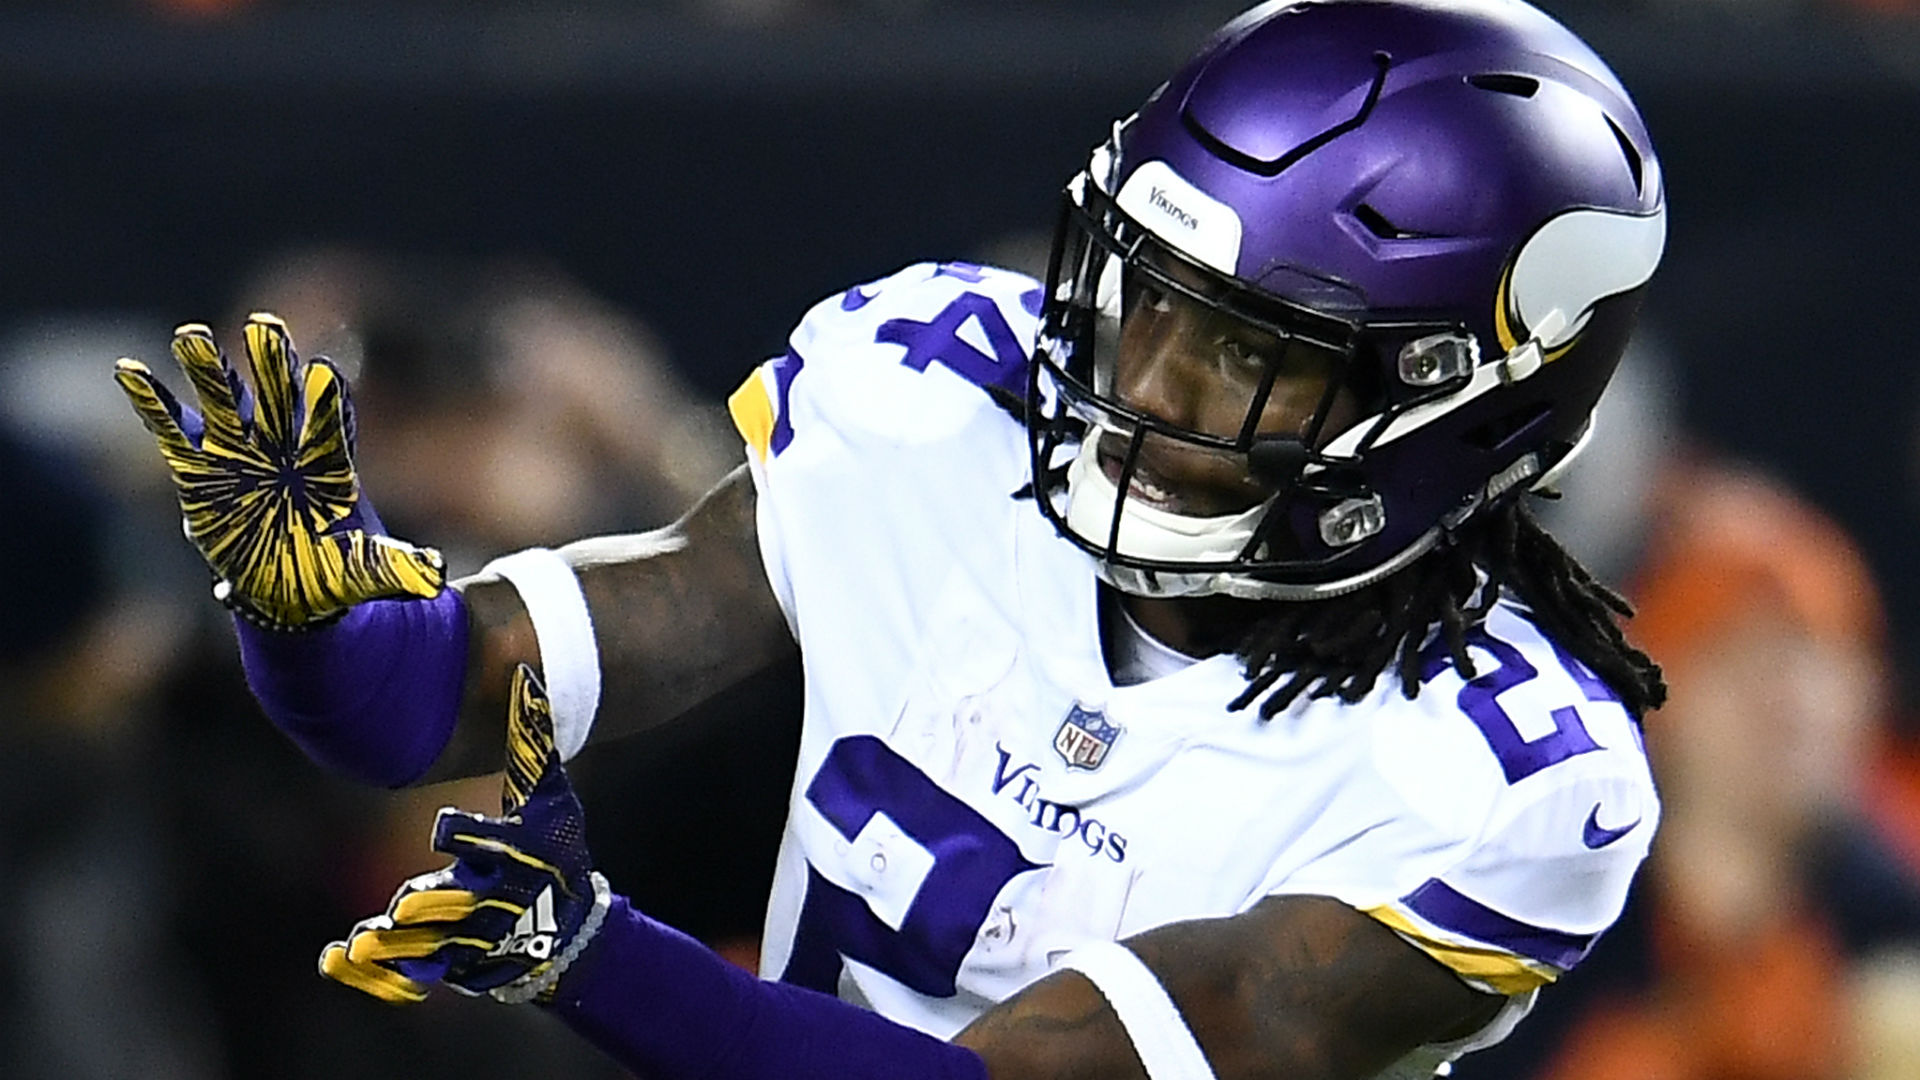 Vikings' Holton Hill will miss first 8 games after earning second 4-game suspension